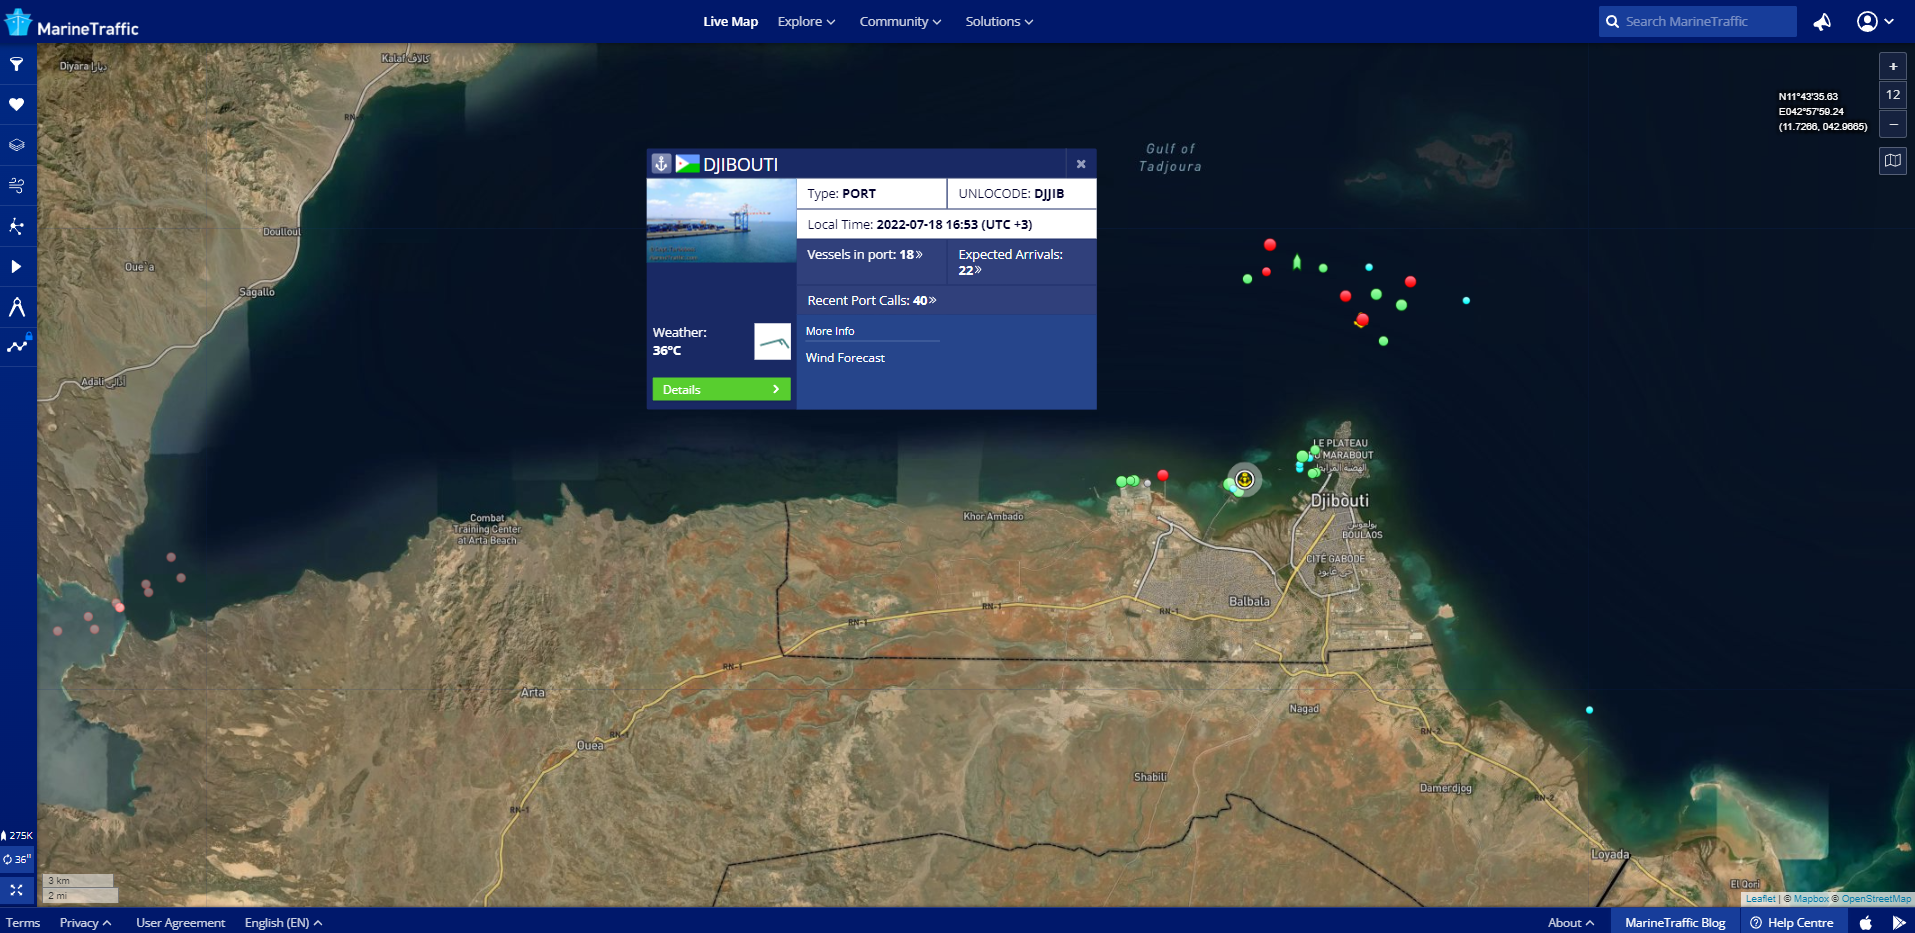 The multipurpose Port of Djibouti has gone under major expansions in recent years as part of the MSR in Africa. Image: marinetraffic.com 